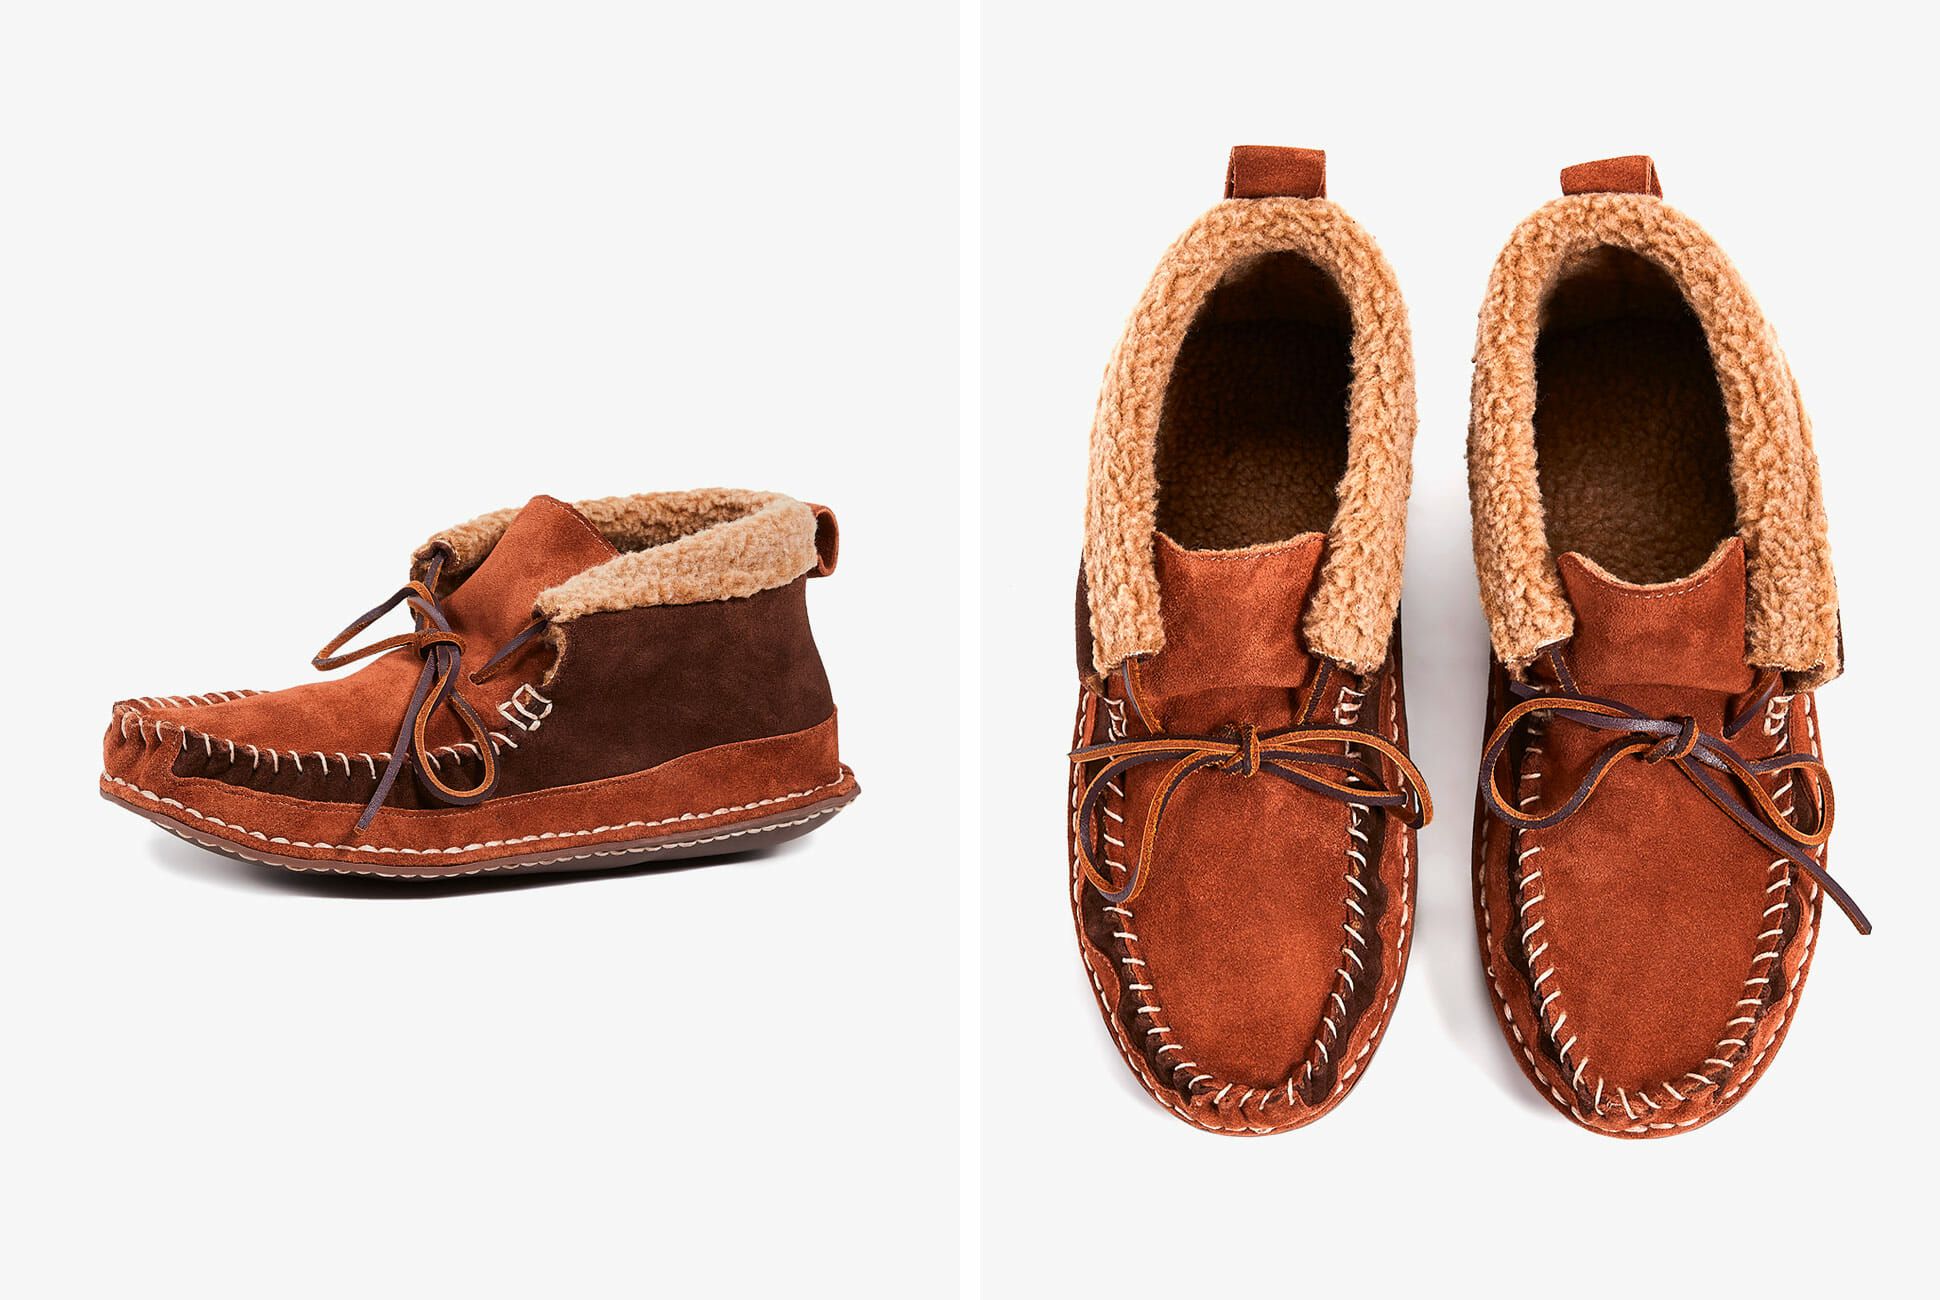 Save 30% on These Warm Suede Slippers